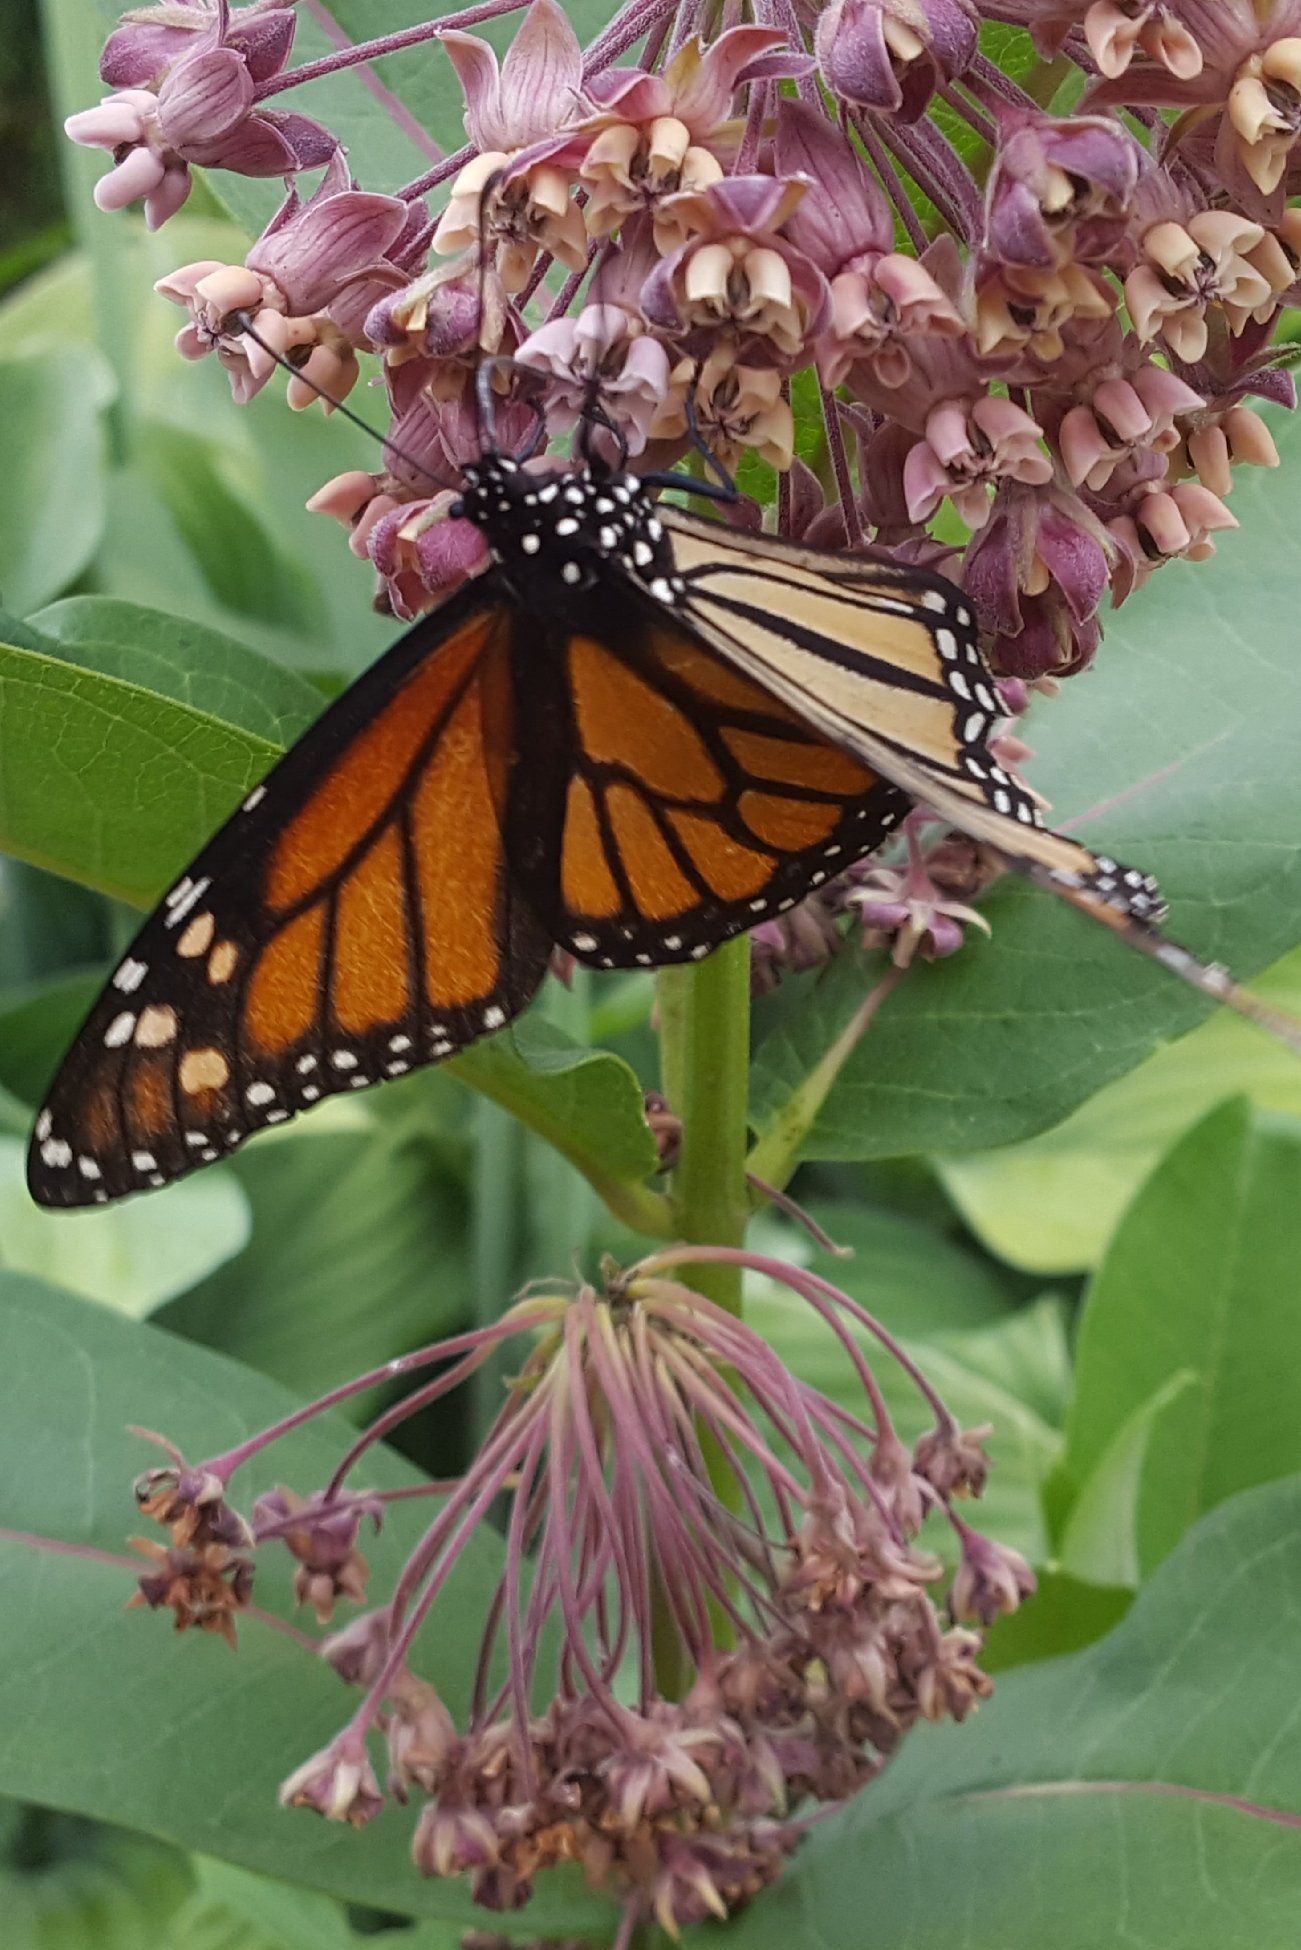 Previous Happening: Monarch Butterfly sighting